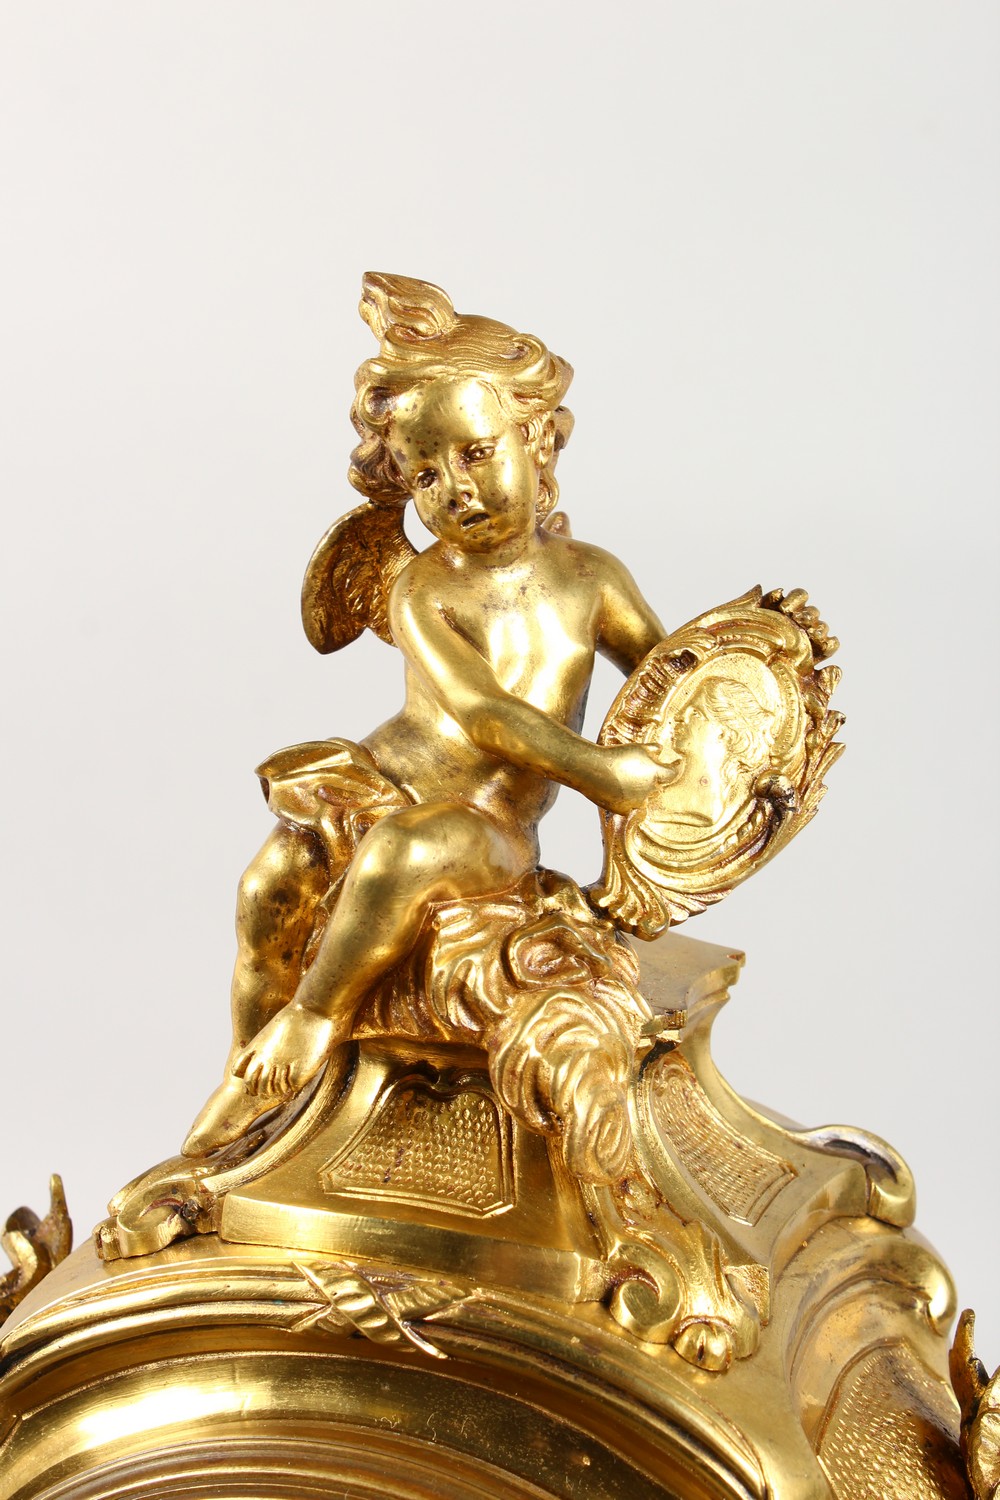 A GOOD LOUIS XVI HEAVY ORMOLU CLOCK by LEROUX, LE MANS, the case with cupids, scrolls, acanthus - Image 2 of 9